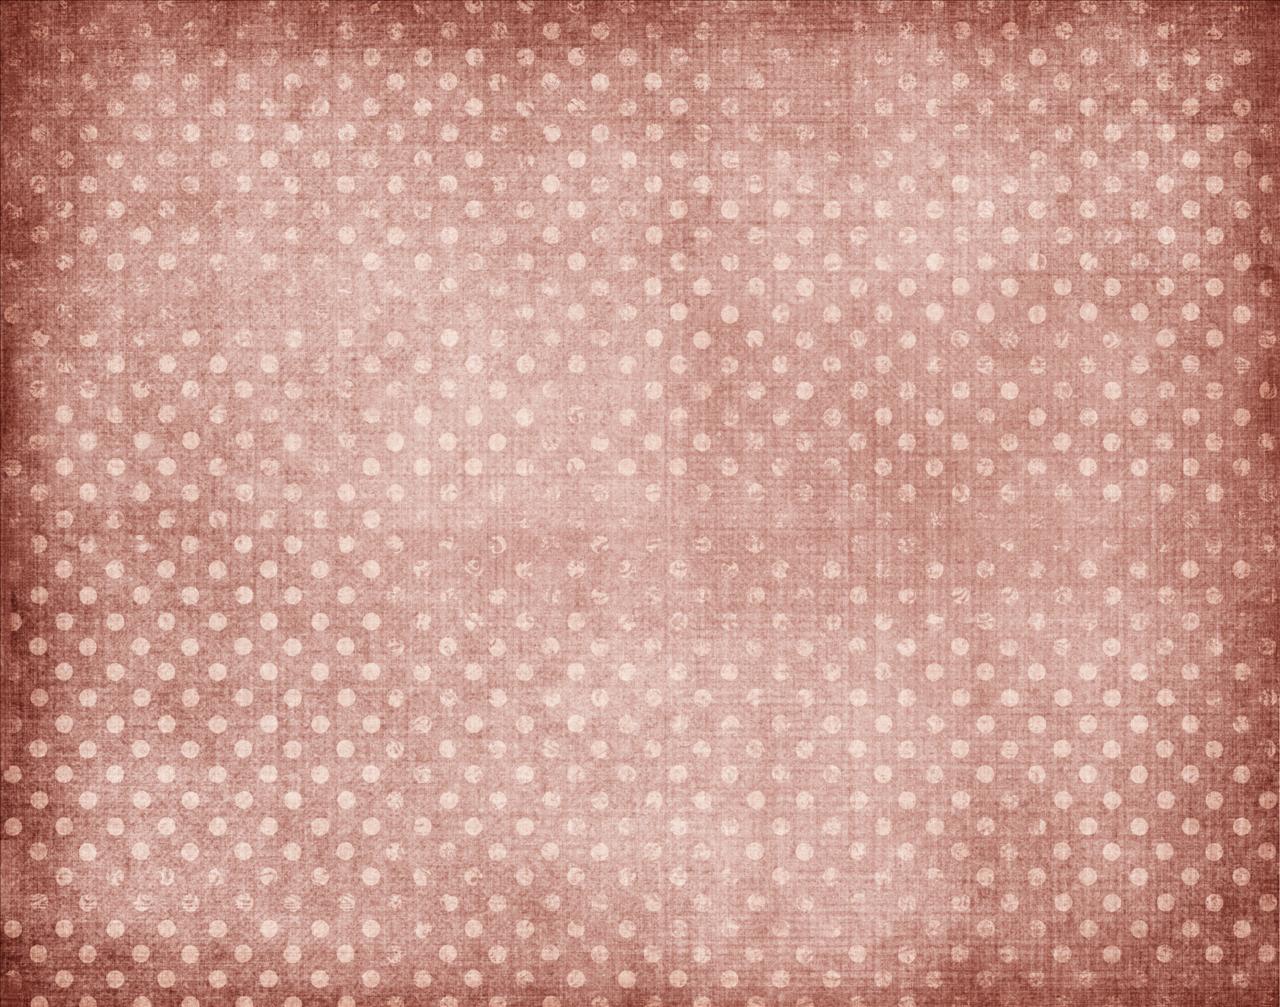 Faded Pink Dots Backgrounds